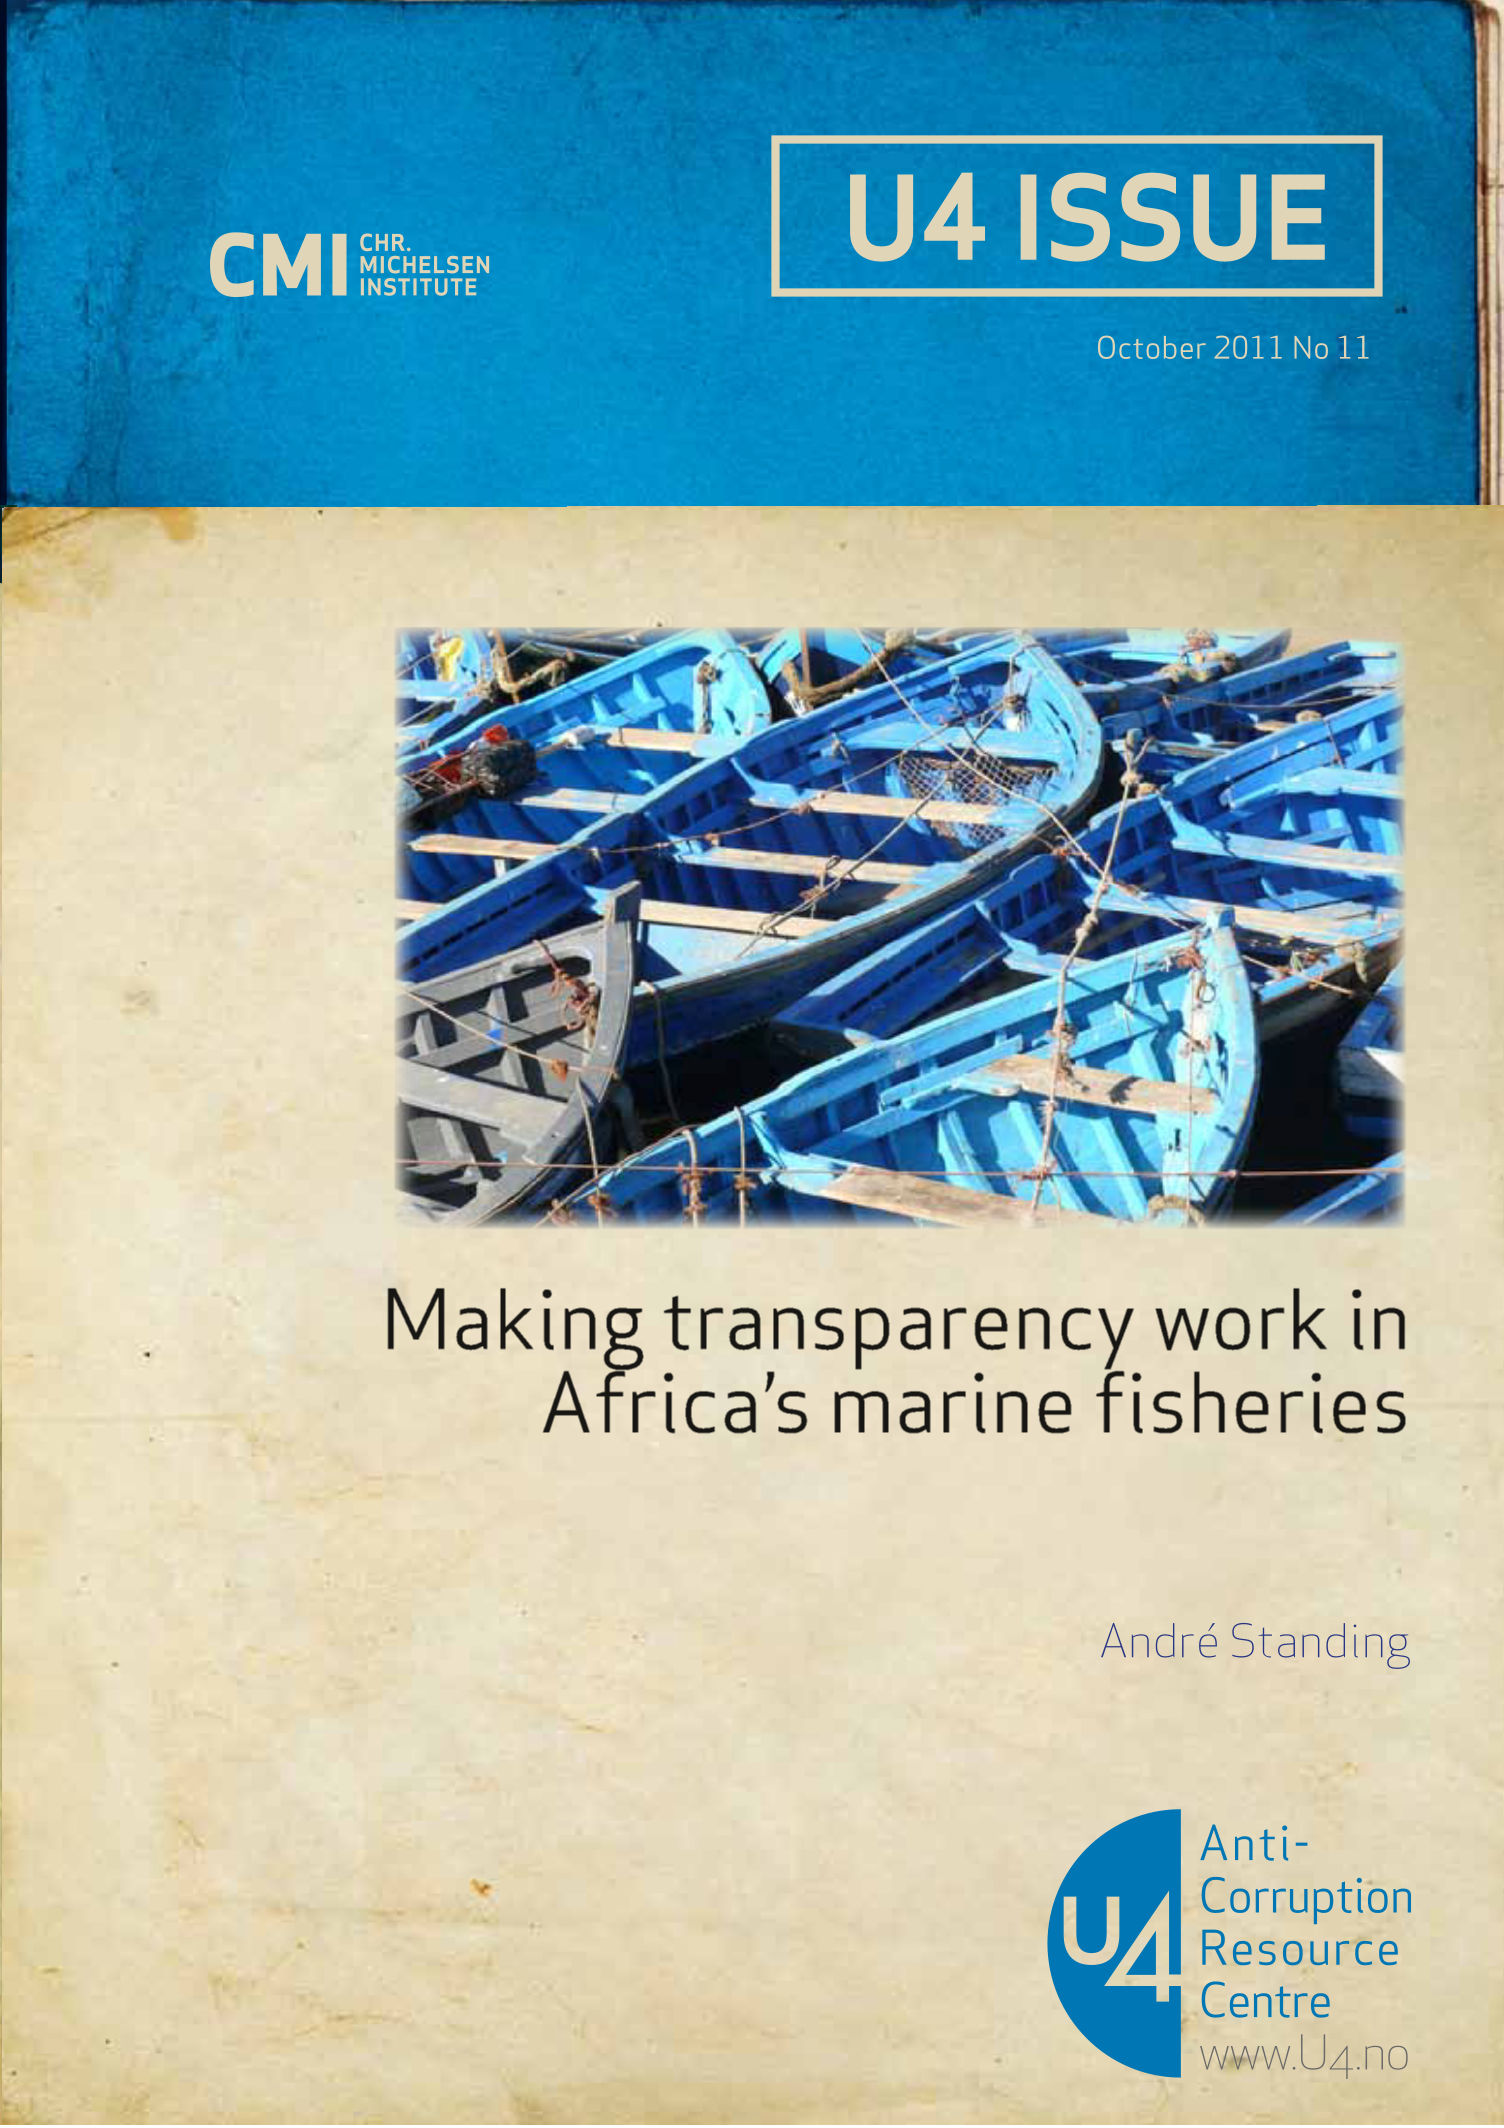 Making transparency work in Africa's marine fisheries